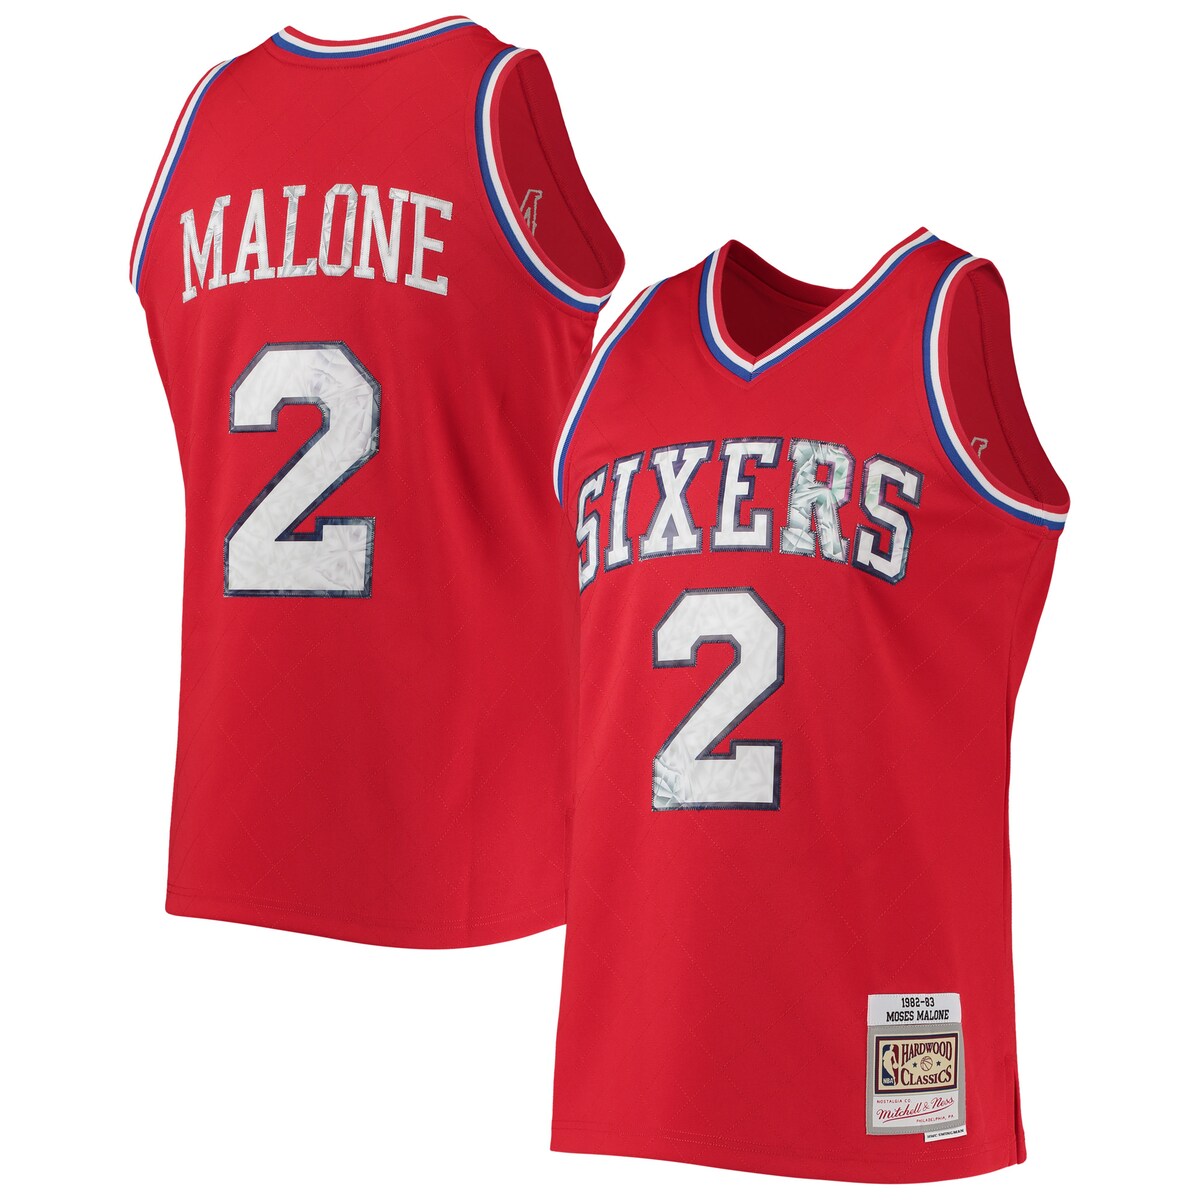 For the NBA's 75th anniversary, throw it back to one of the stars of the Philadelphia 76ers with this Moses Malone Hardwood Classics Diamond Swingman jersey from Mitchell & Ness. It features faux diamond details for the league's big milestone and that old-school design Moses Malone used to wear back in the day. This authentic piece of gear is a great way to mesh past and present as you get fired up for game day.Material: 100% PolyesterMachine wash, line drySwingman ThrowbackWoven jock tag at hemBrand: Mitchell & NessStitched designImportedStitched holographic applique with faux diamond patternStraight hemline with side splitsOfficially licensedSleeveless